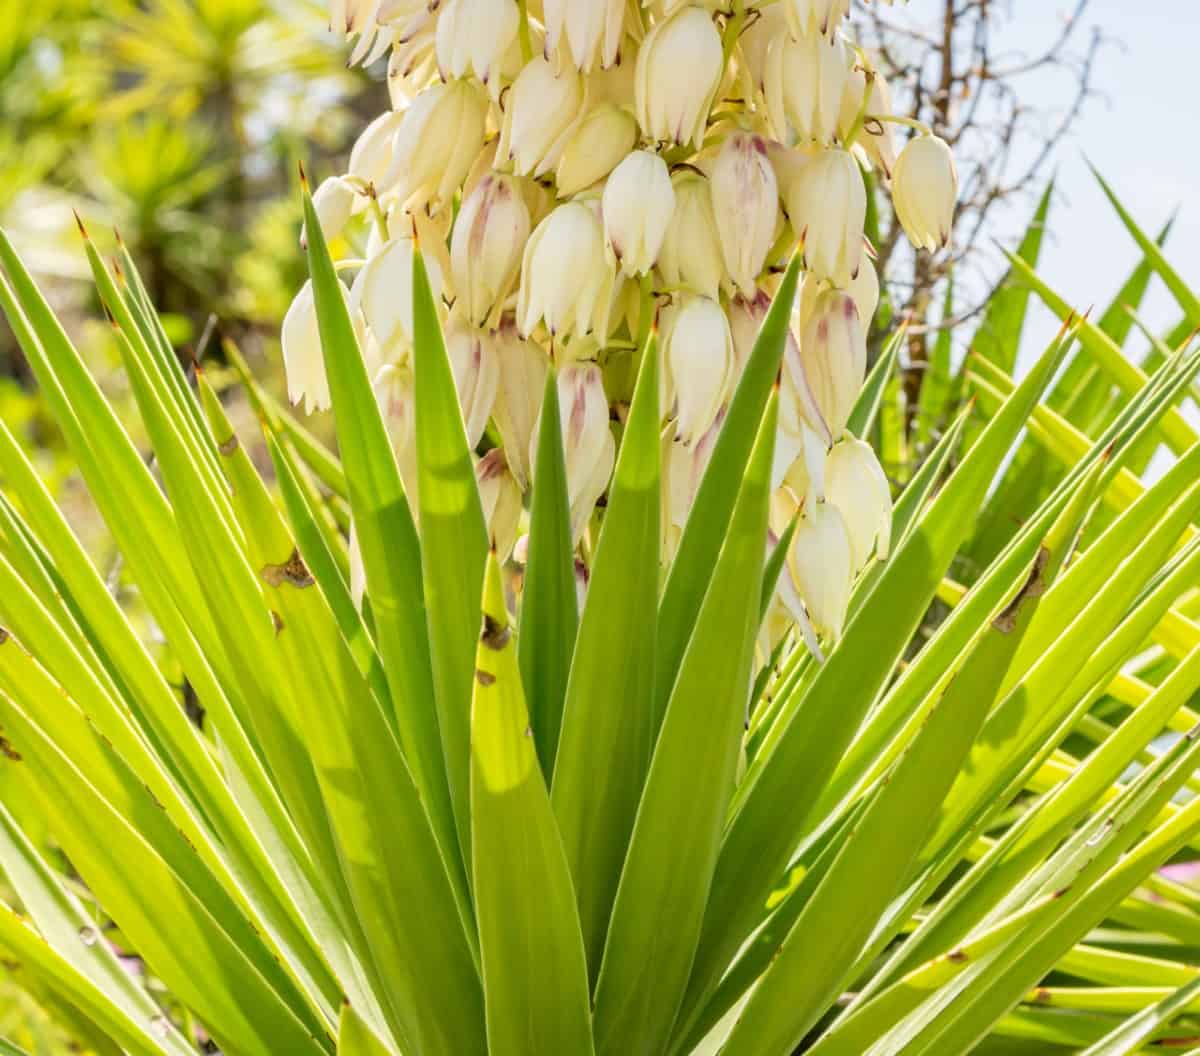 The Adam's needle is also called a yucca.